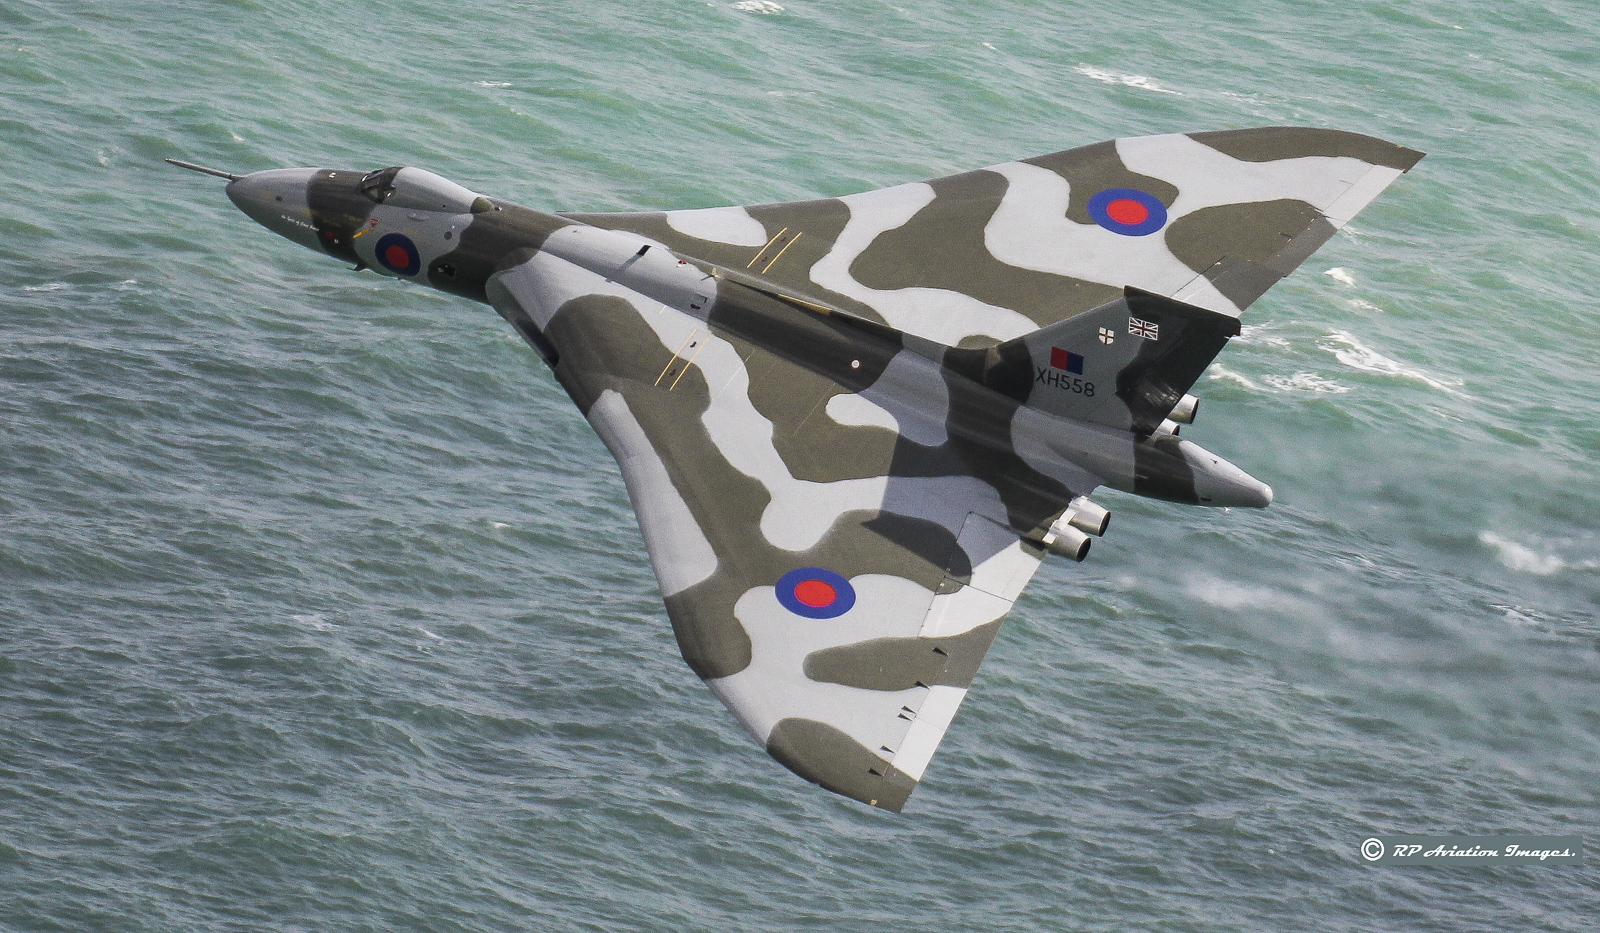 A fabulous view of XH558 as she roars over the water at Beachy Head in southern England. (photo by Robin Pettifer)